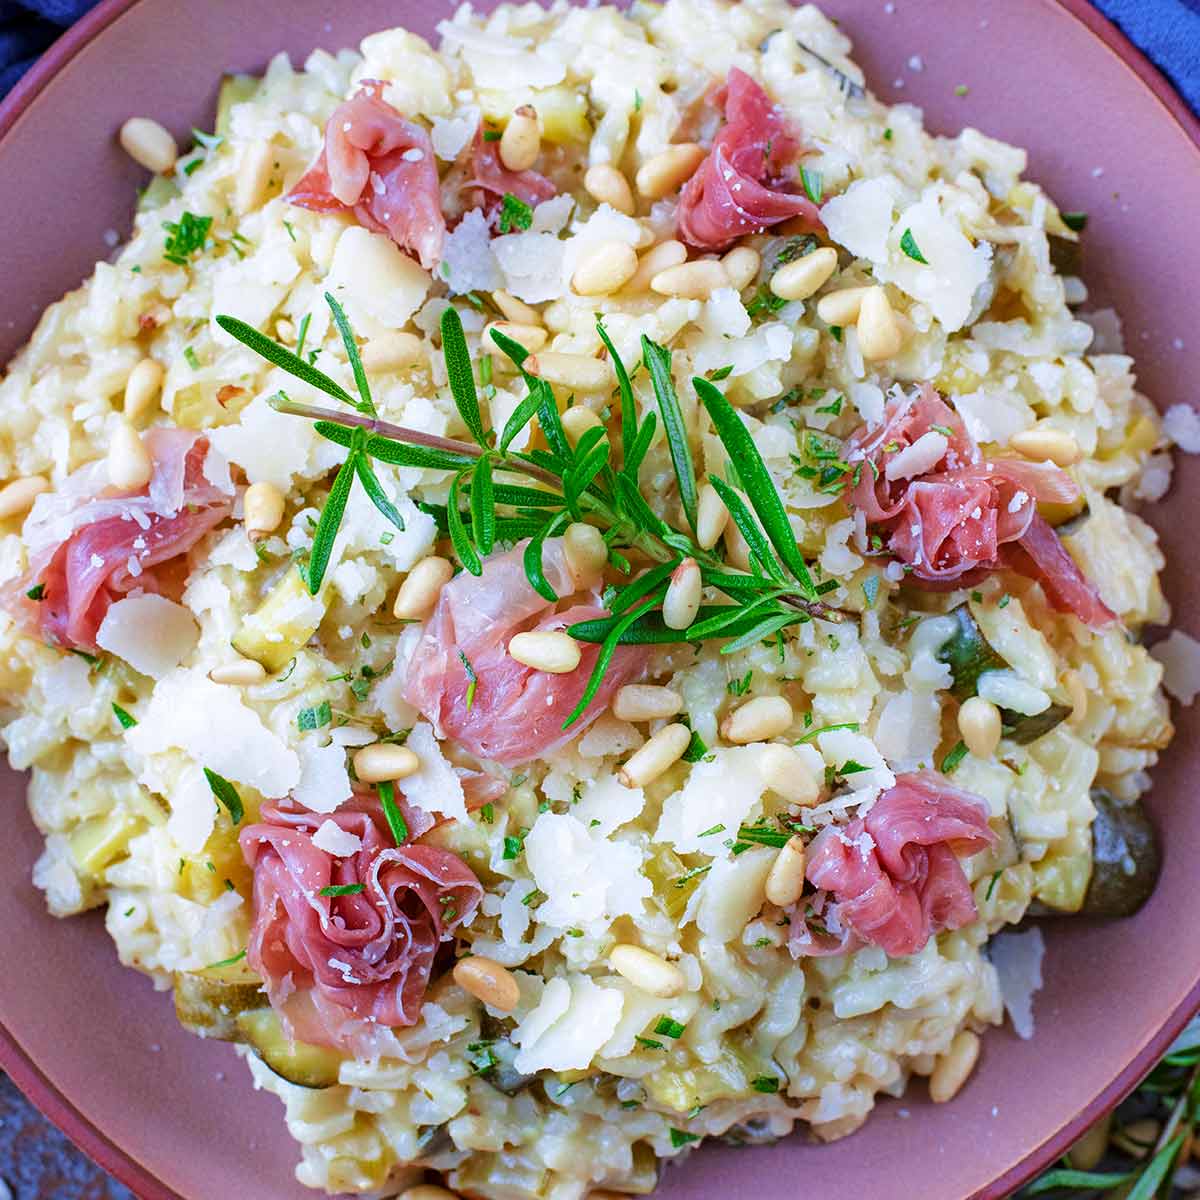 Courgette Risotto in a pink bowl with rosemary sprig on top.